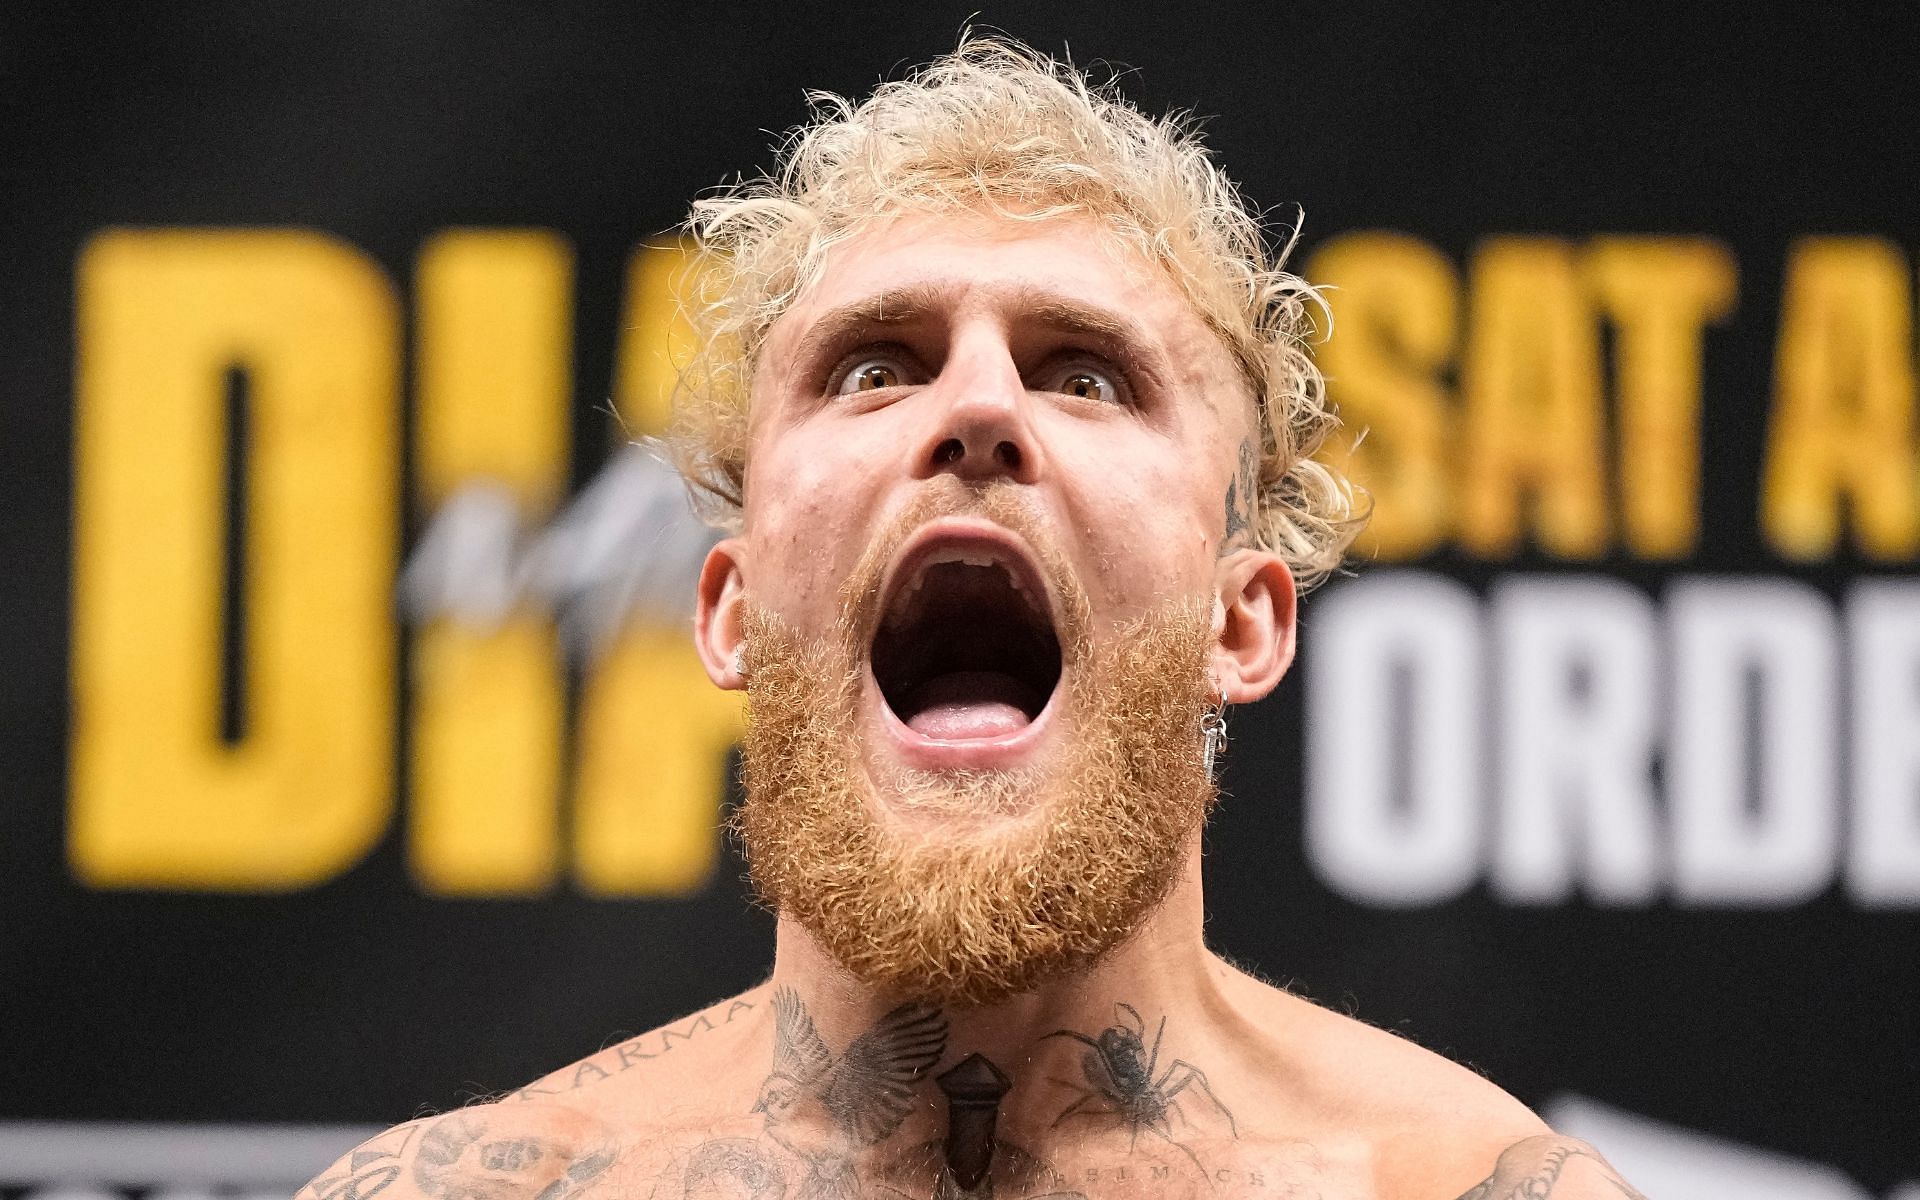 Jake Paul has been lauded by many for his tremendous knockout power [Image courtesy: Getty Images]